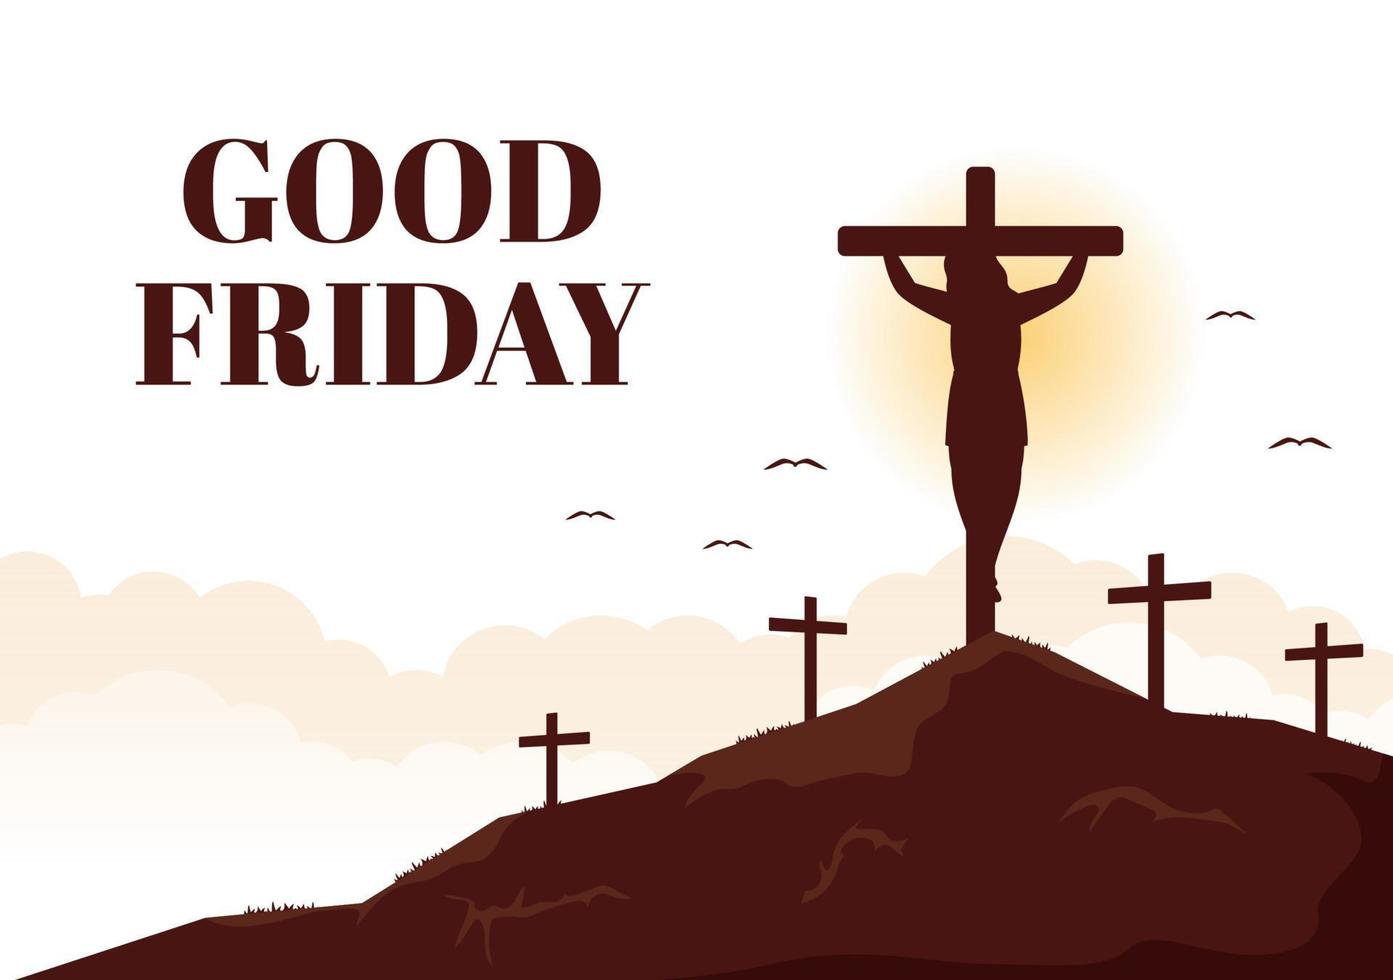 Happy Good Friday Illustration with Christian Holiday of Jesus Christ Crucifixion in Flat Cartoon Hand Drawn for Web Banner or Landing Page Templates vector